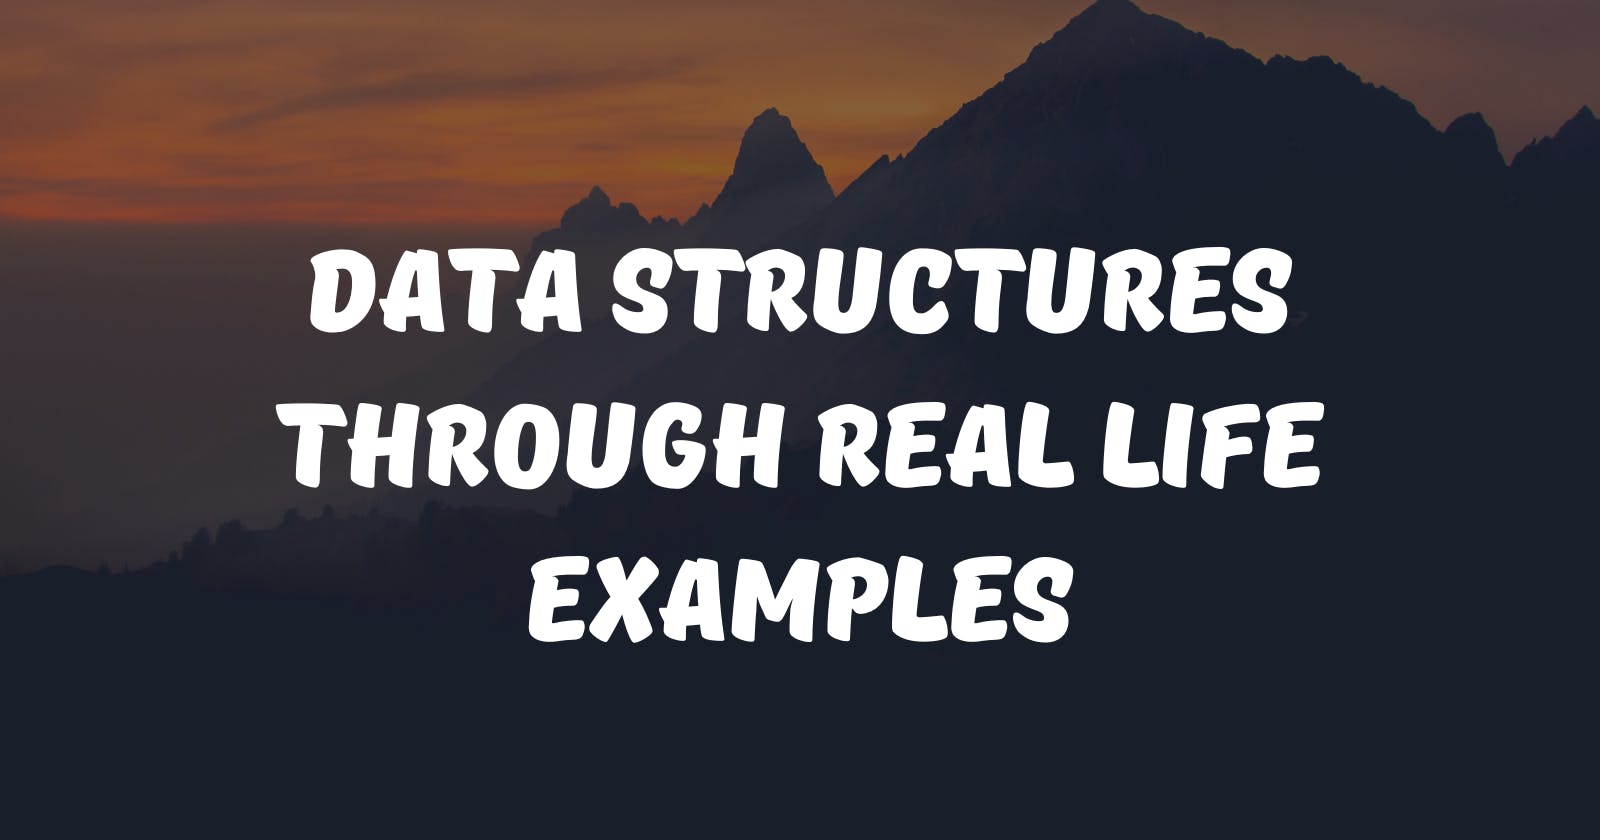 Data Structures through Real Life Examples